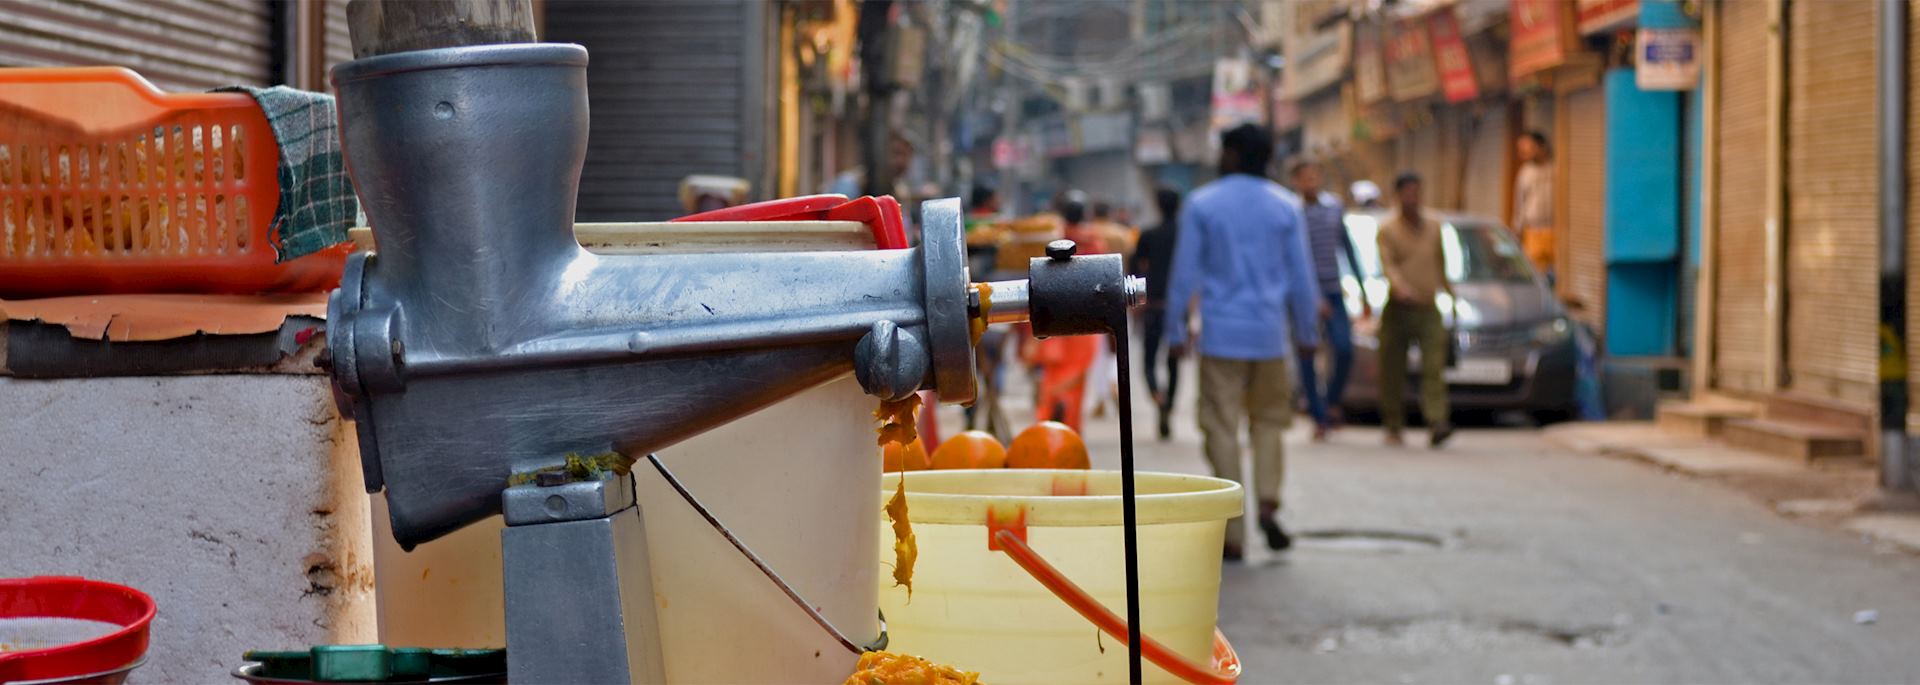 Hand juicer on a street in Chandni Chowk